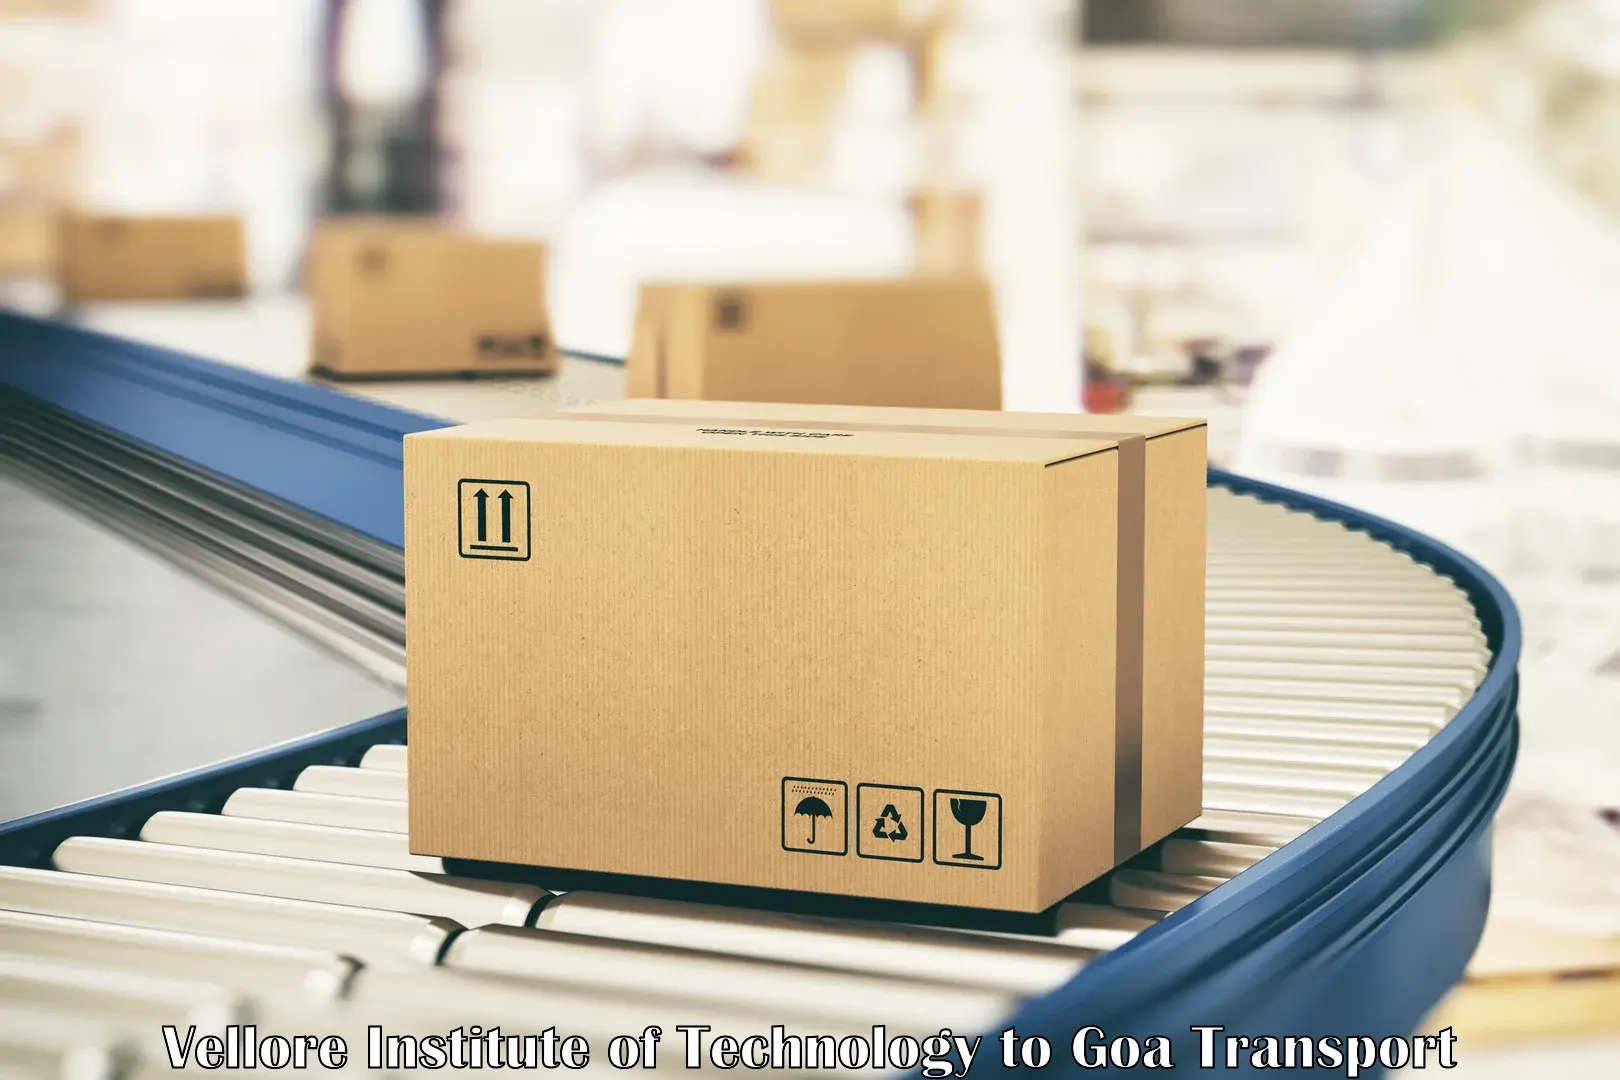 Parcel transport services Vellore Institute of Technology to Goa